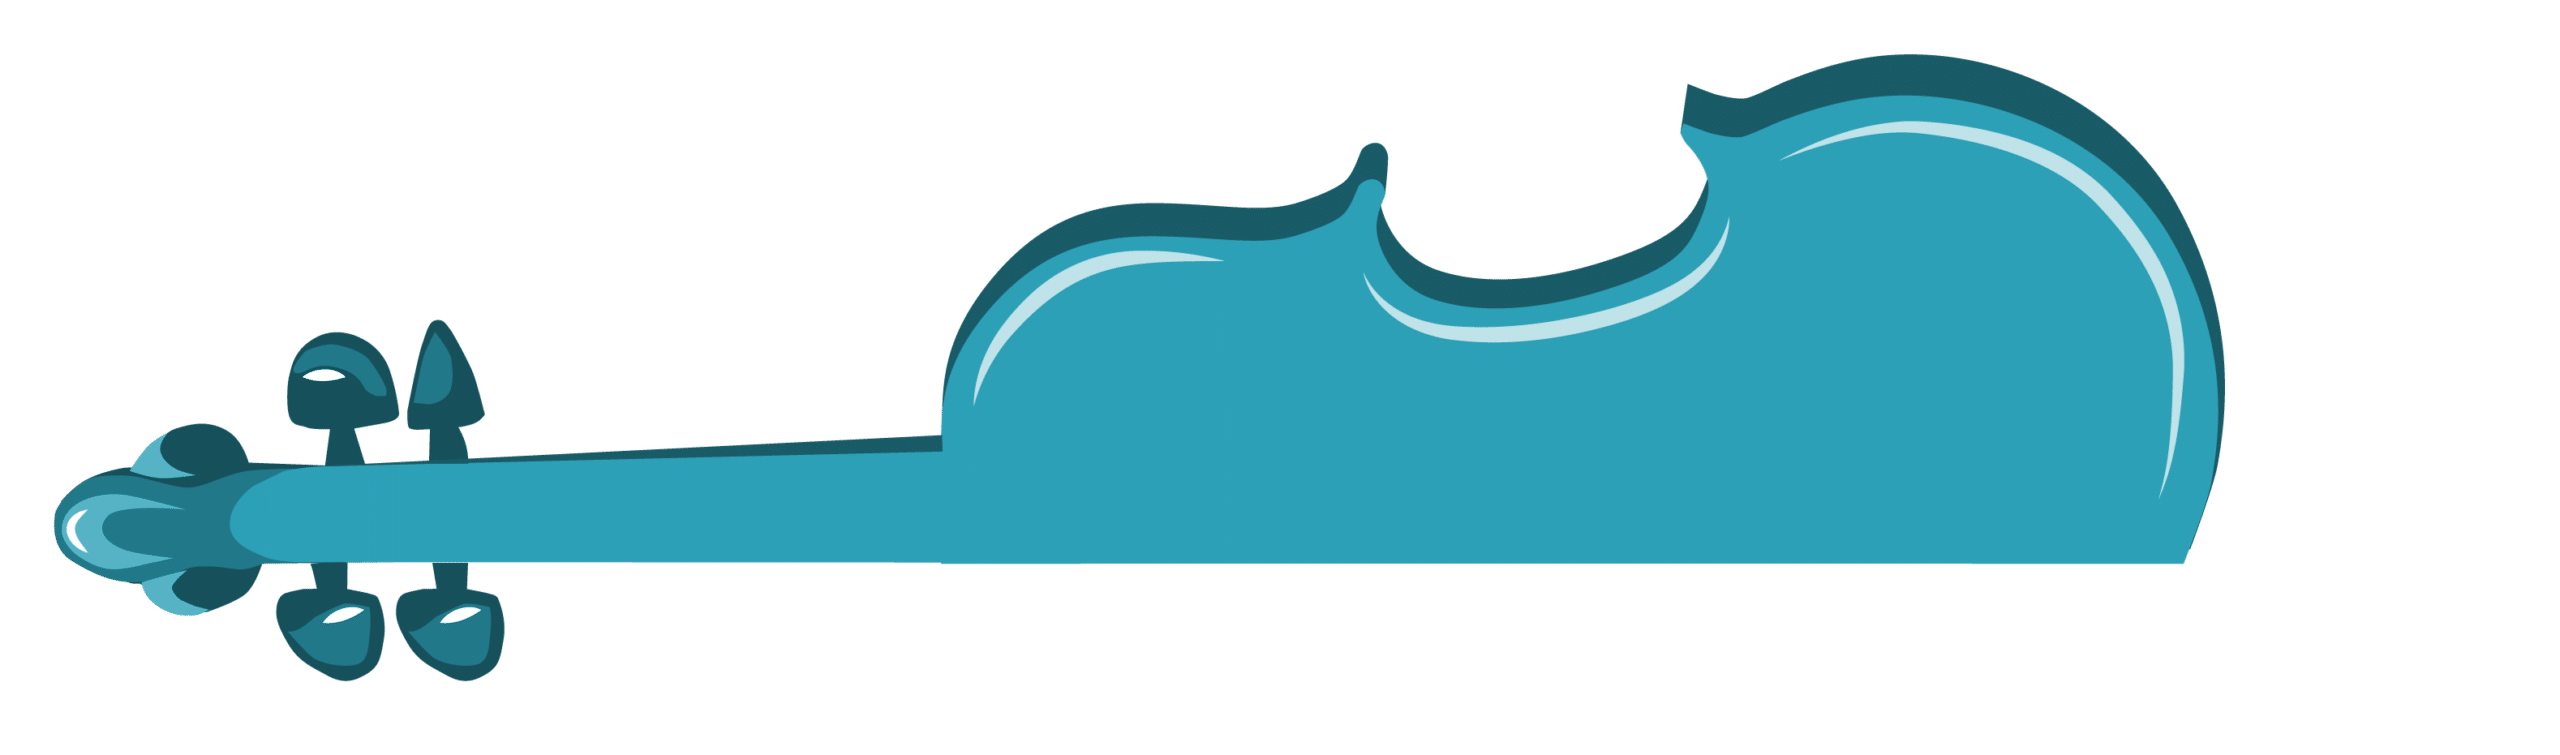 The String Connection